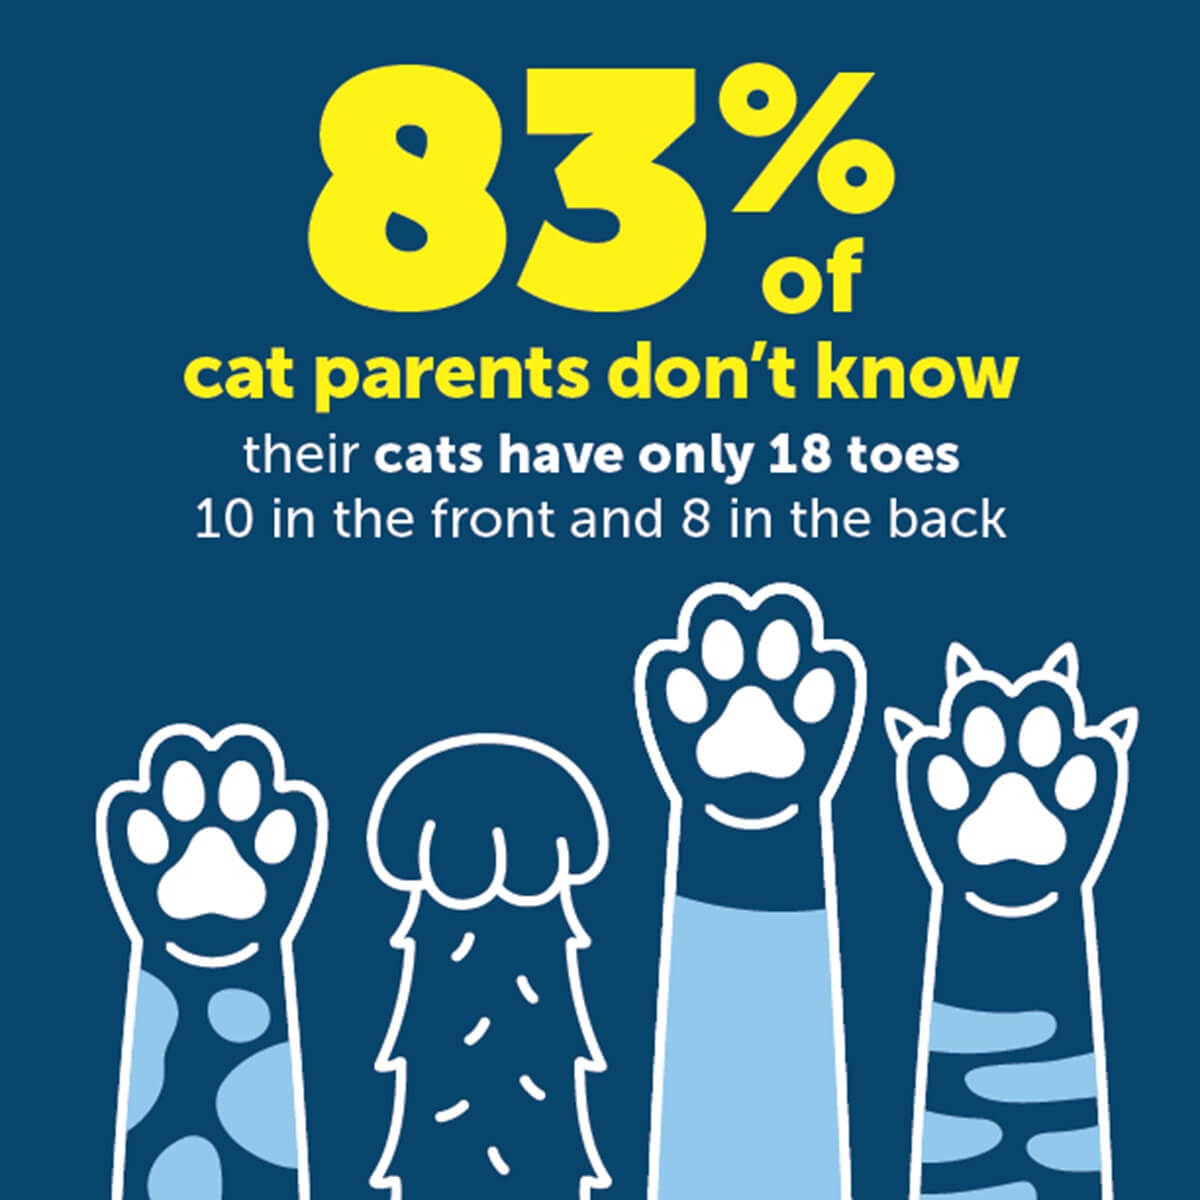 infographic on how many toes cat have and their owners ignorance of the fact